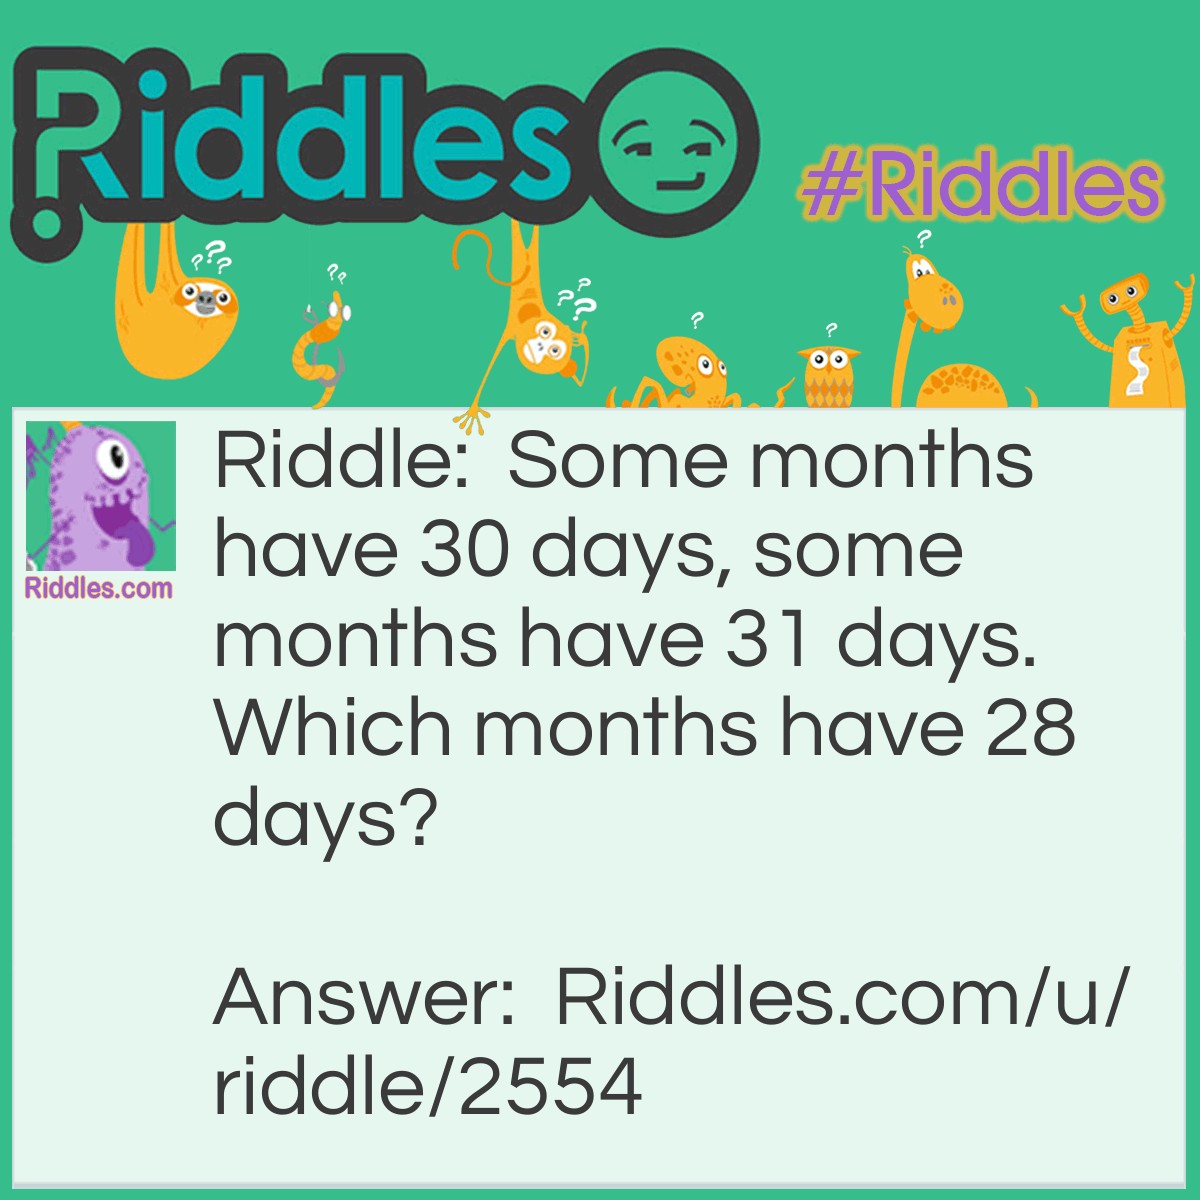 Riddle: Some months have 30 days, some months have 31 days. Which months have 28 days? Answer: All twelve months. Does all the twelve months have at least 28 days?